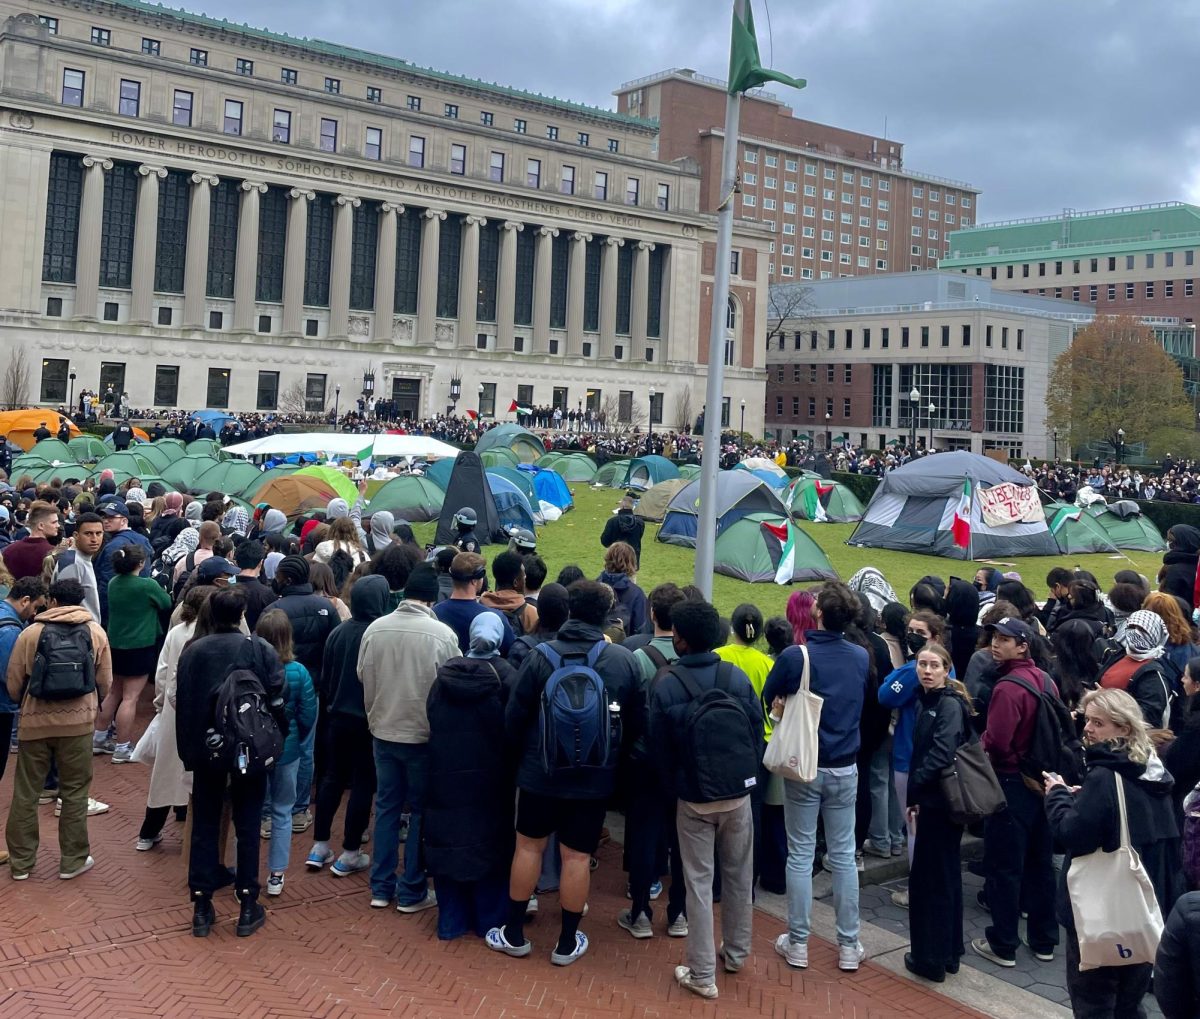 Columbia+Universitys+campus+has+broken+out+into+protests+and+encampments+of+students+protesting+the+war+in+Gaza.